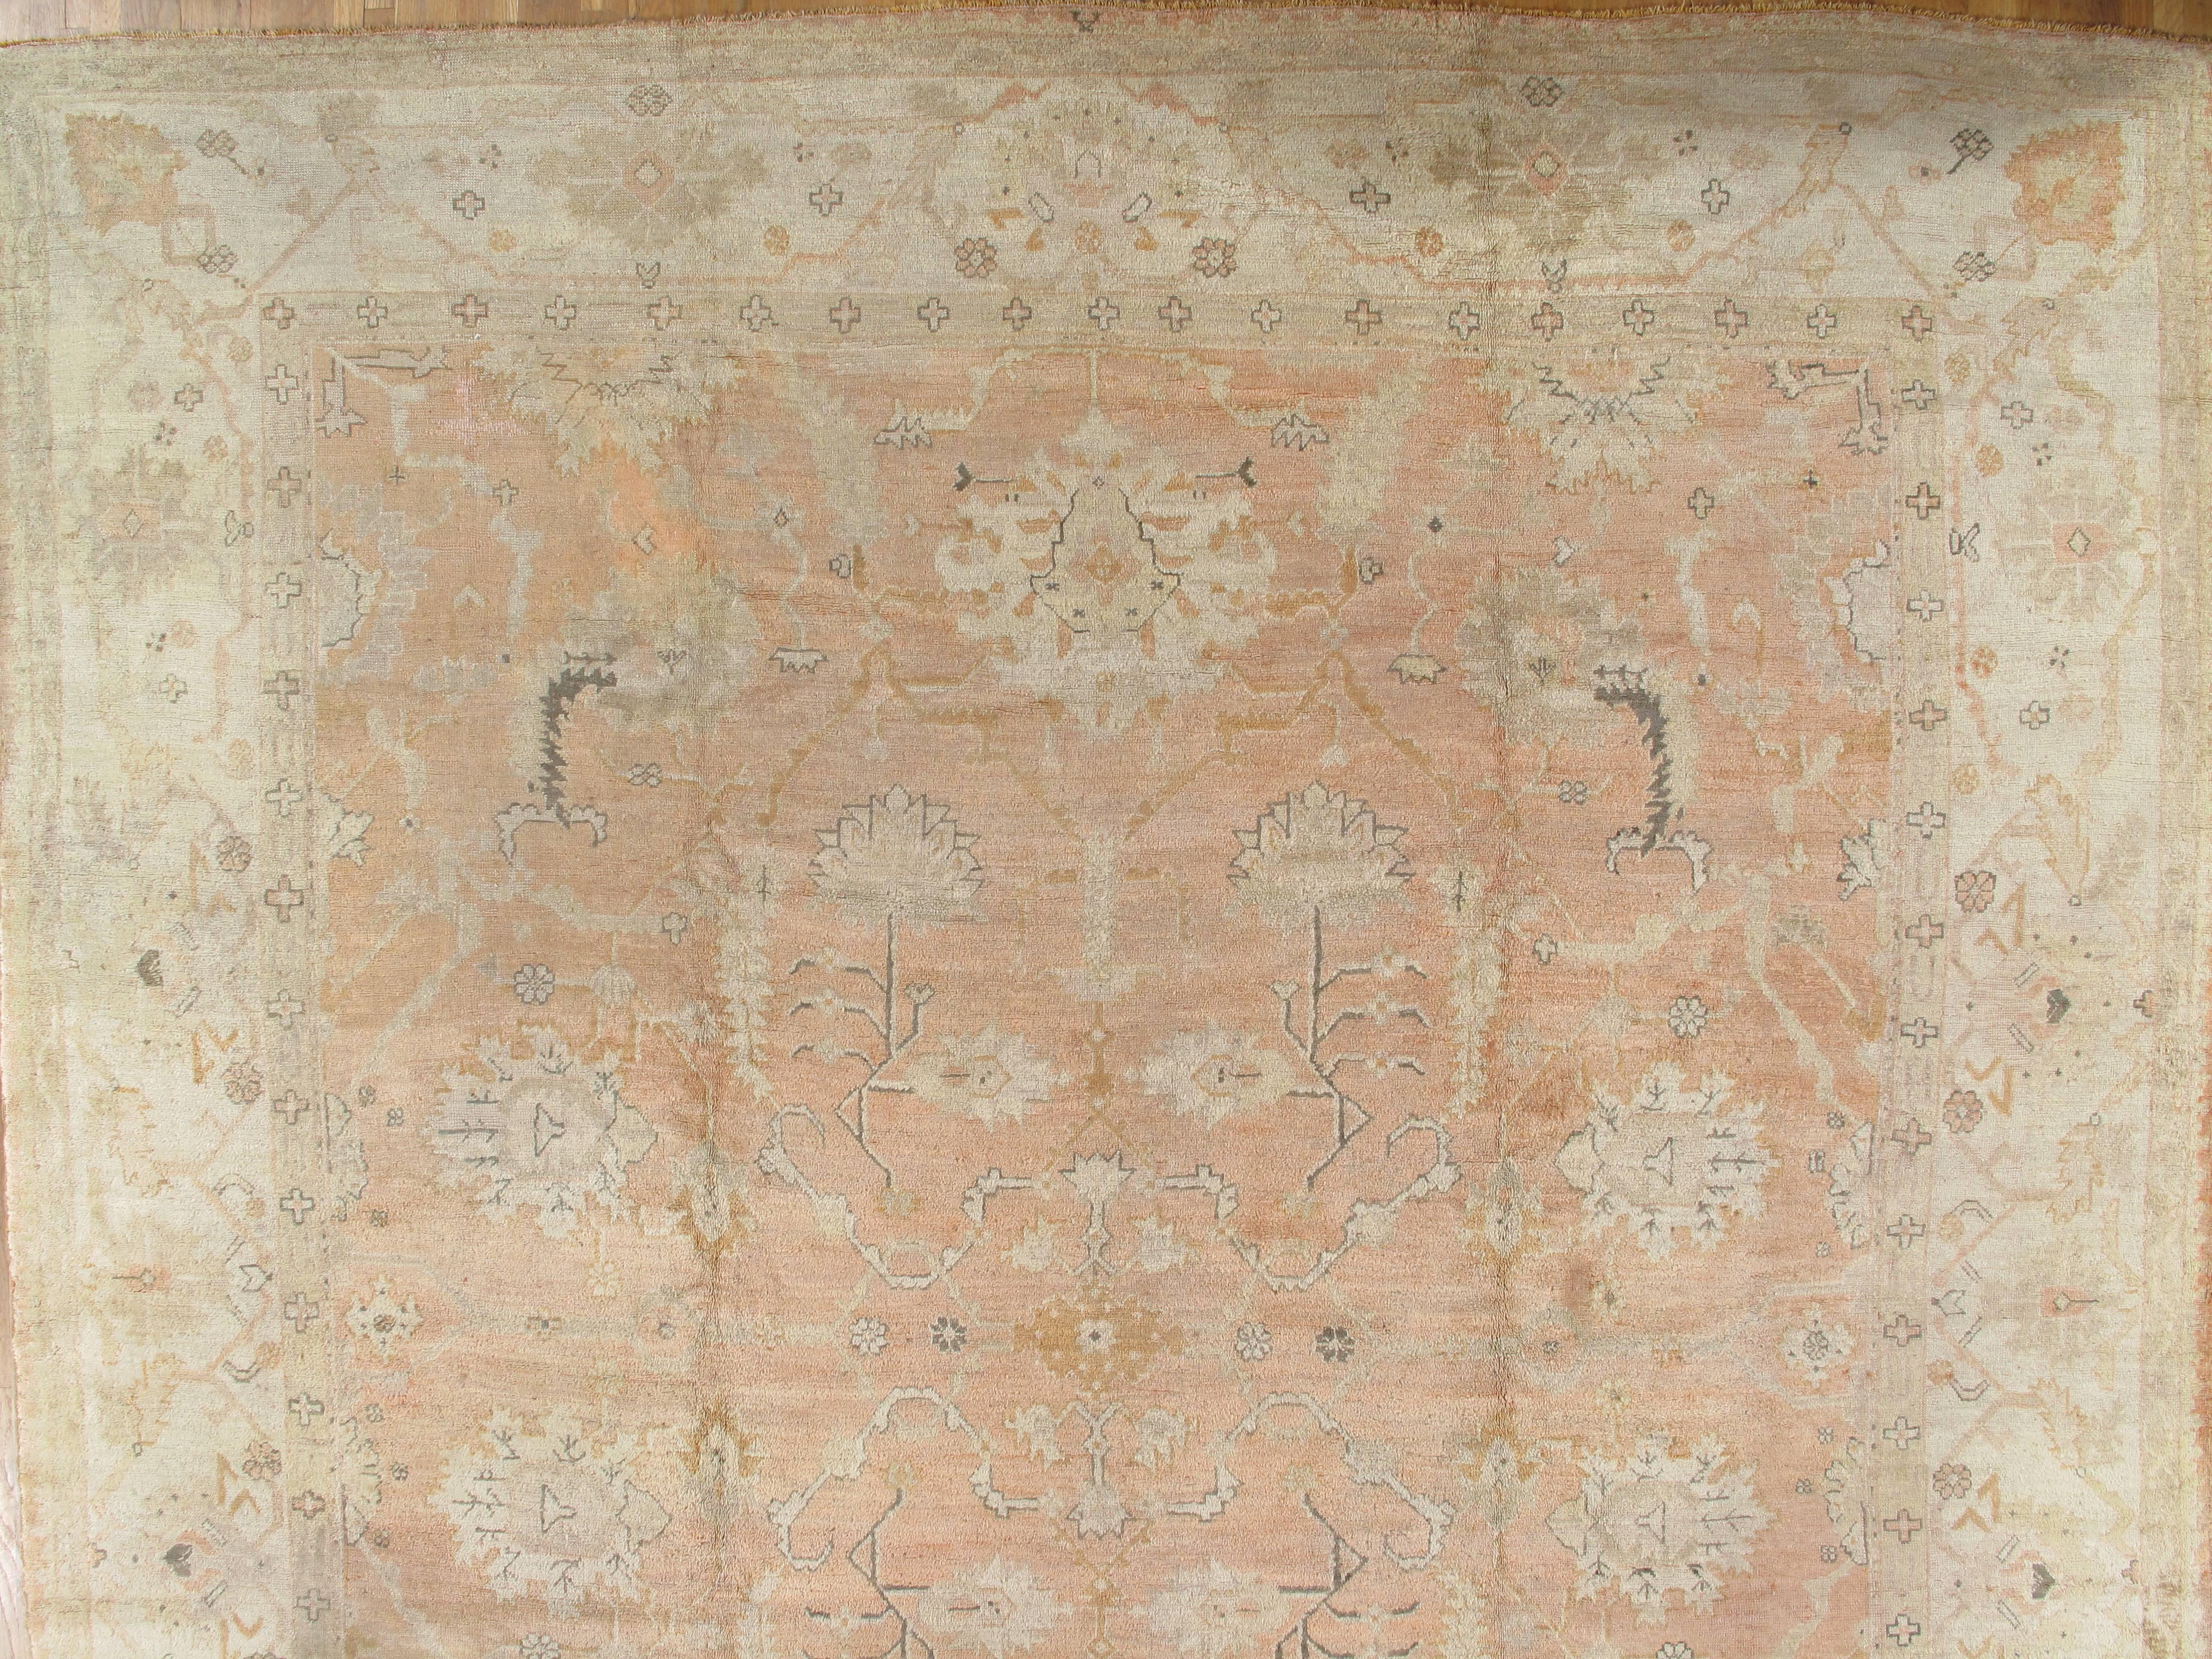 West Anatolia is one of the largest weaving regions in Turkey. Since the 15th century, Turkish rugs have always been on top of the list for having Fine oriental rugs.
Oushak rugs such as this, are desirable in today’s highly decorative market. A